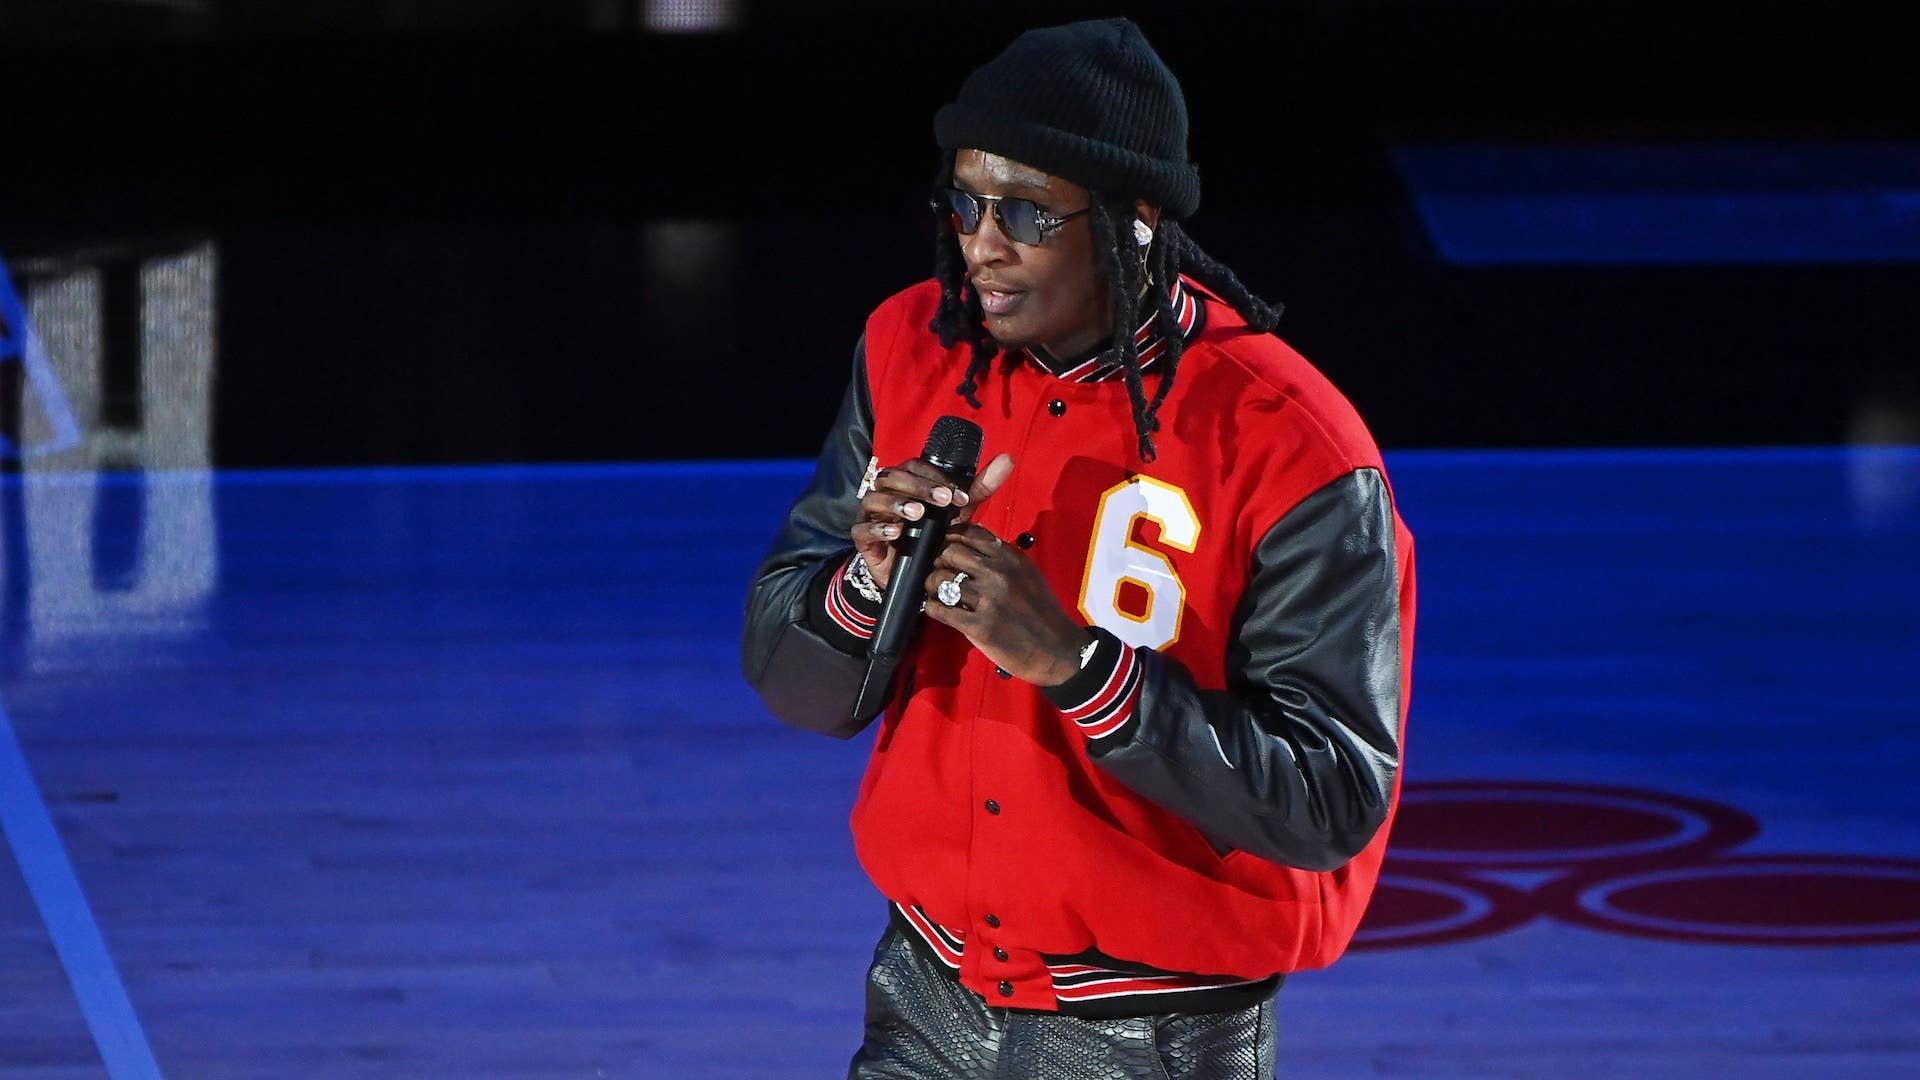 Rapper Young Thug performs at halftime during the Boston Celtics v Atlanta Hawks